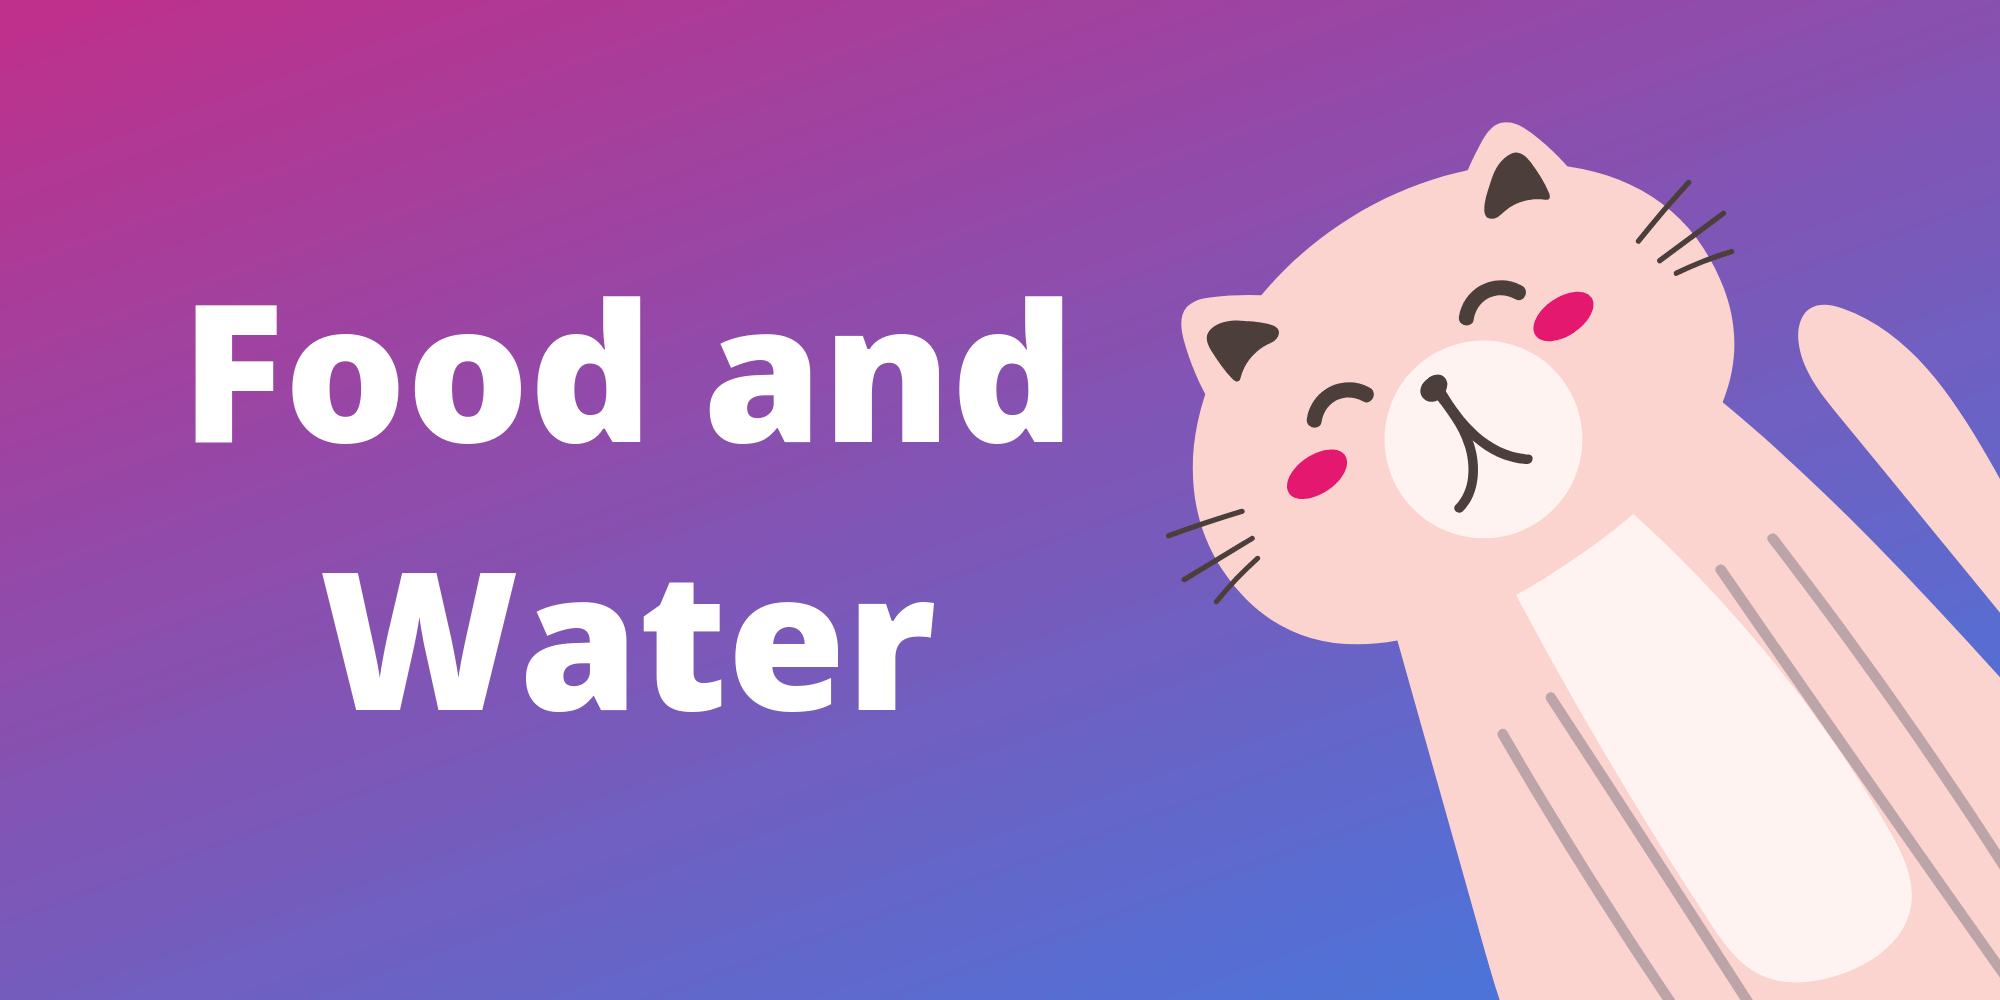 Food and Water Tips for Cat Sitting